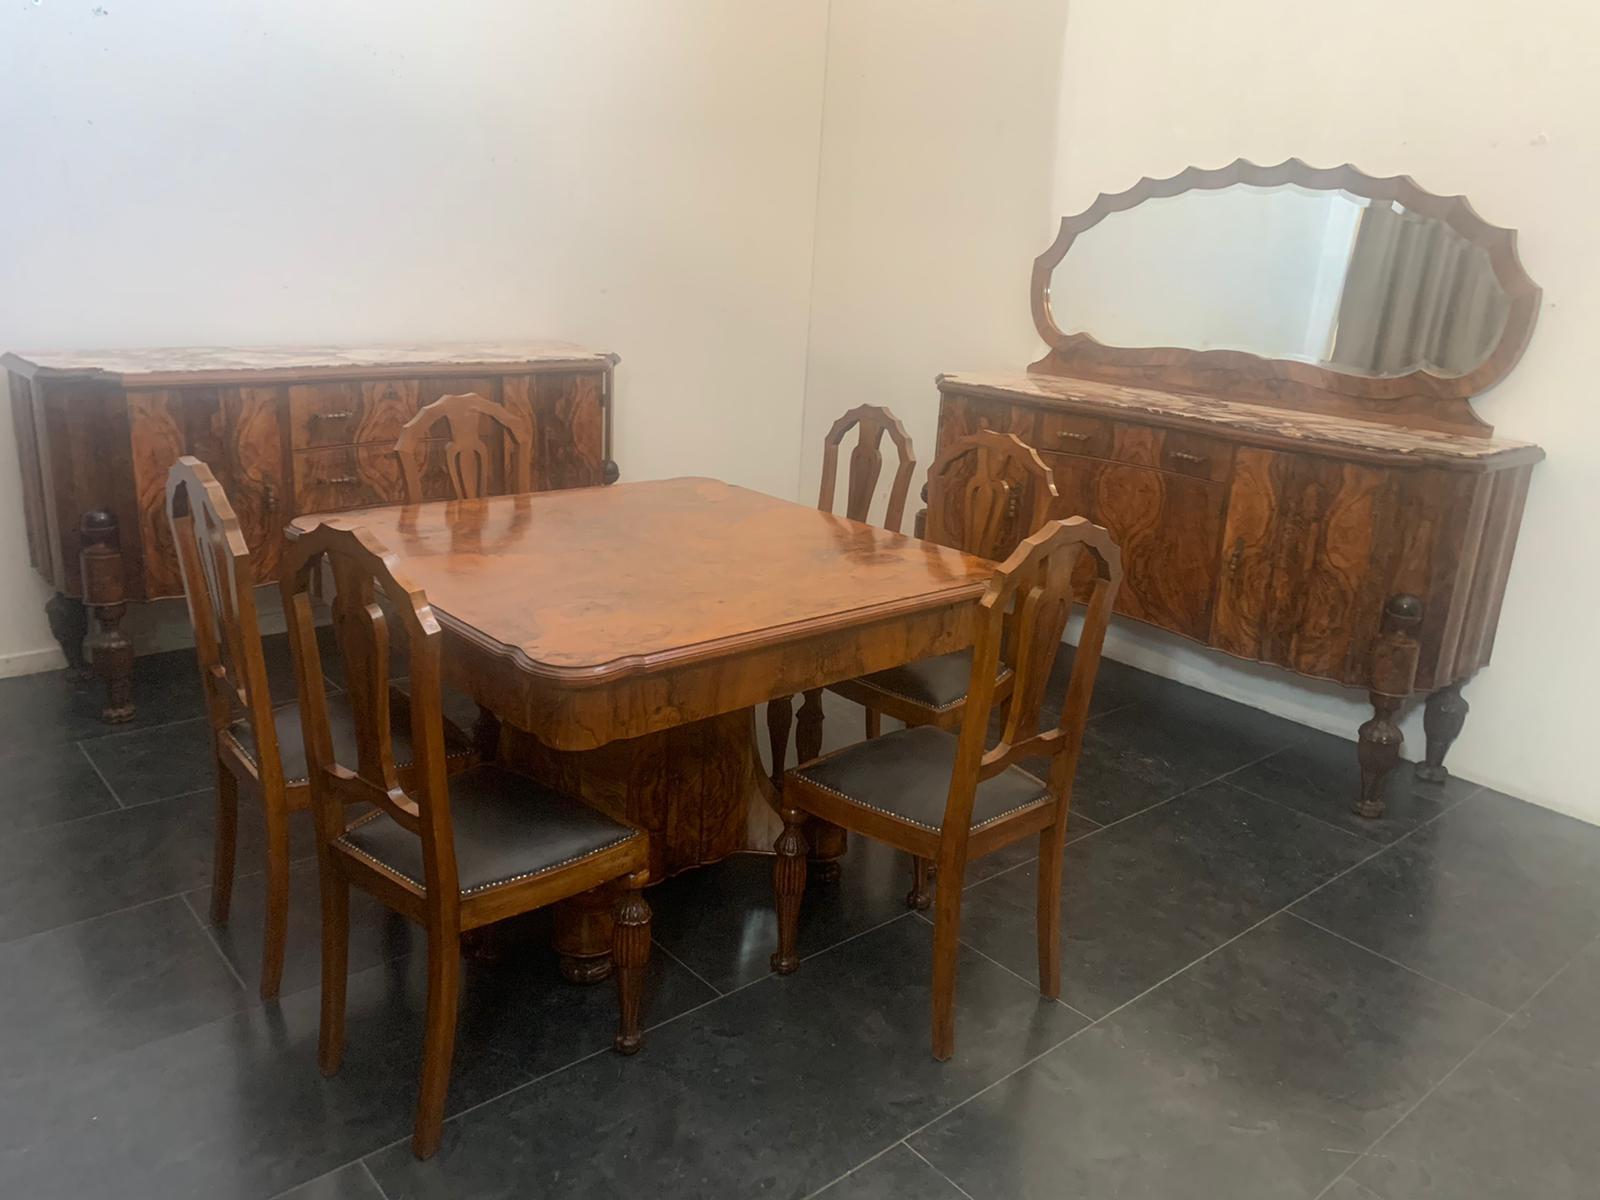 1930s dining table and chairs